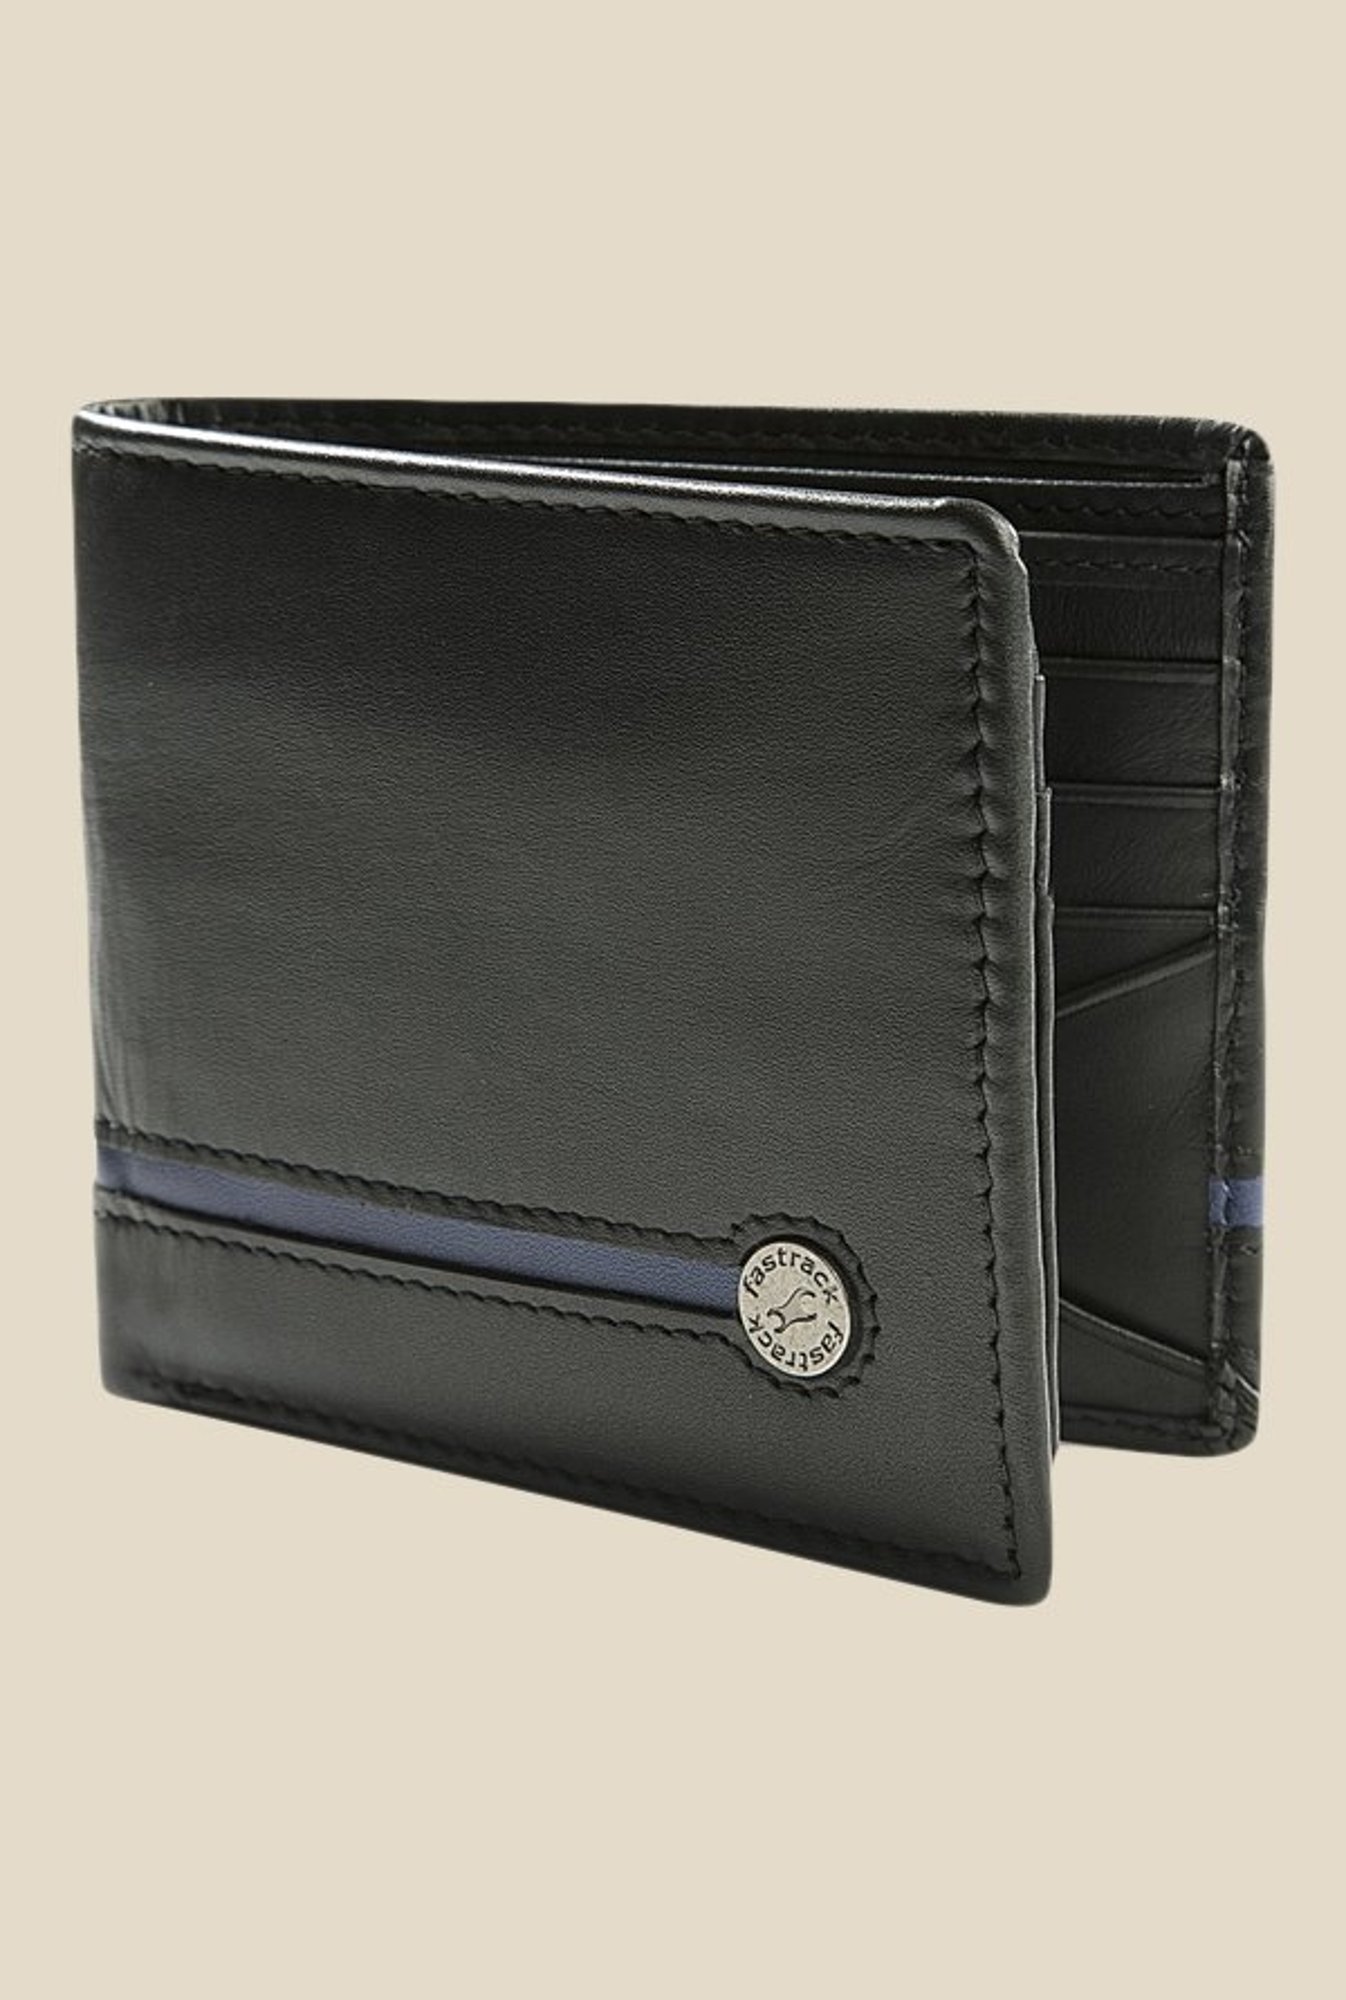 Buy Fastrack Blue Leather Men's Wallet (C0403LBL02) at Amazon.in